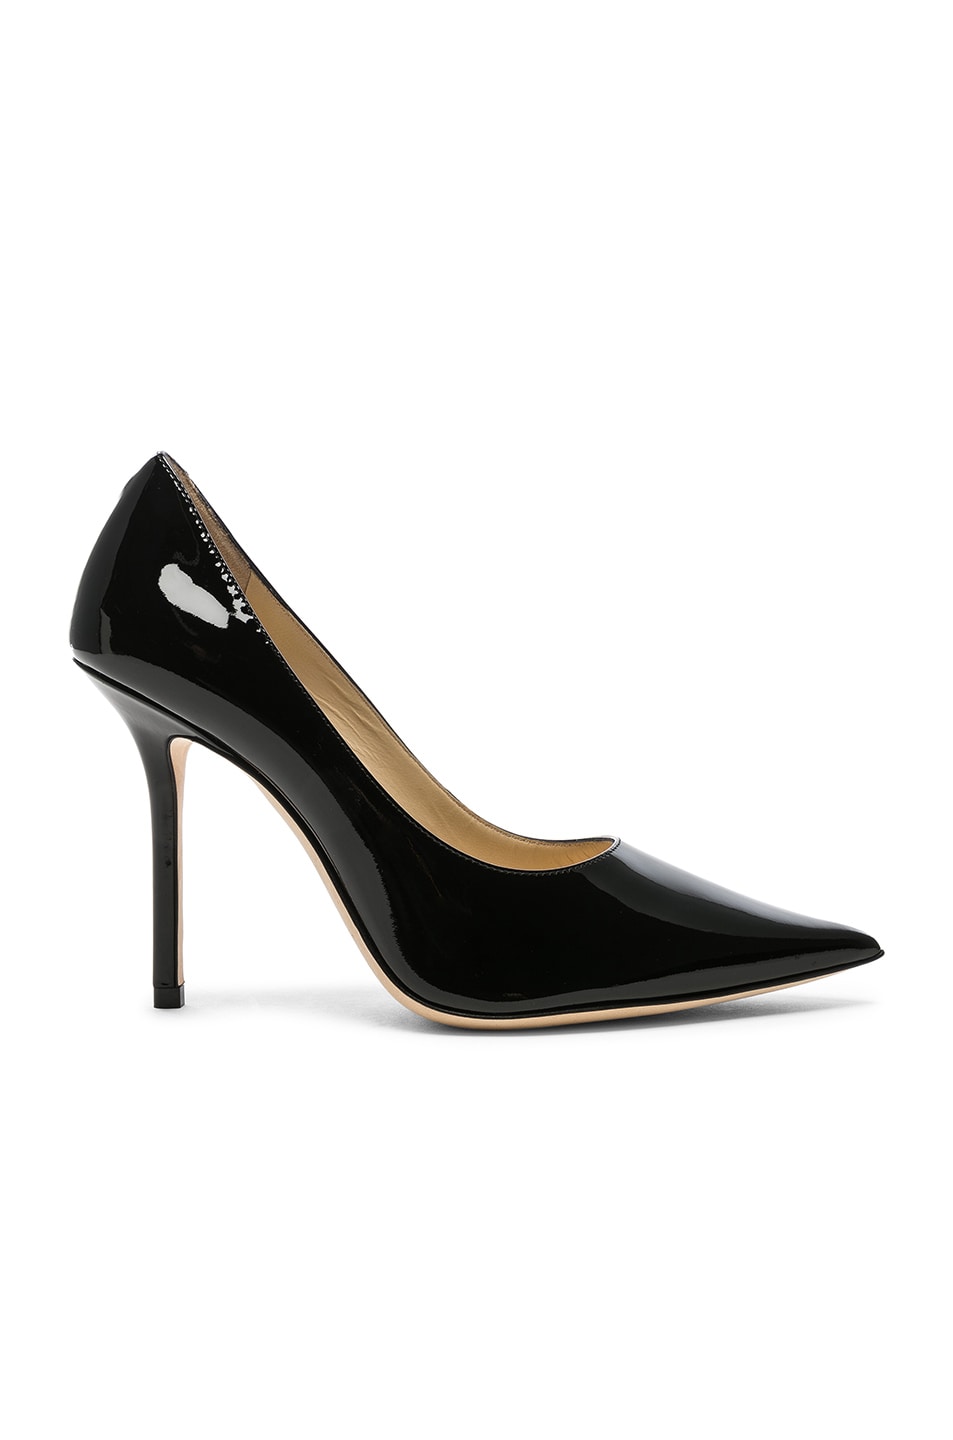 Image 1 of Jimmy Choo Love 100 Patent Leather Heel in Black